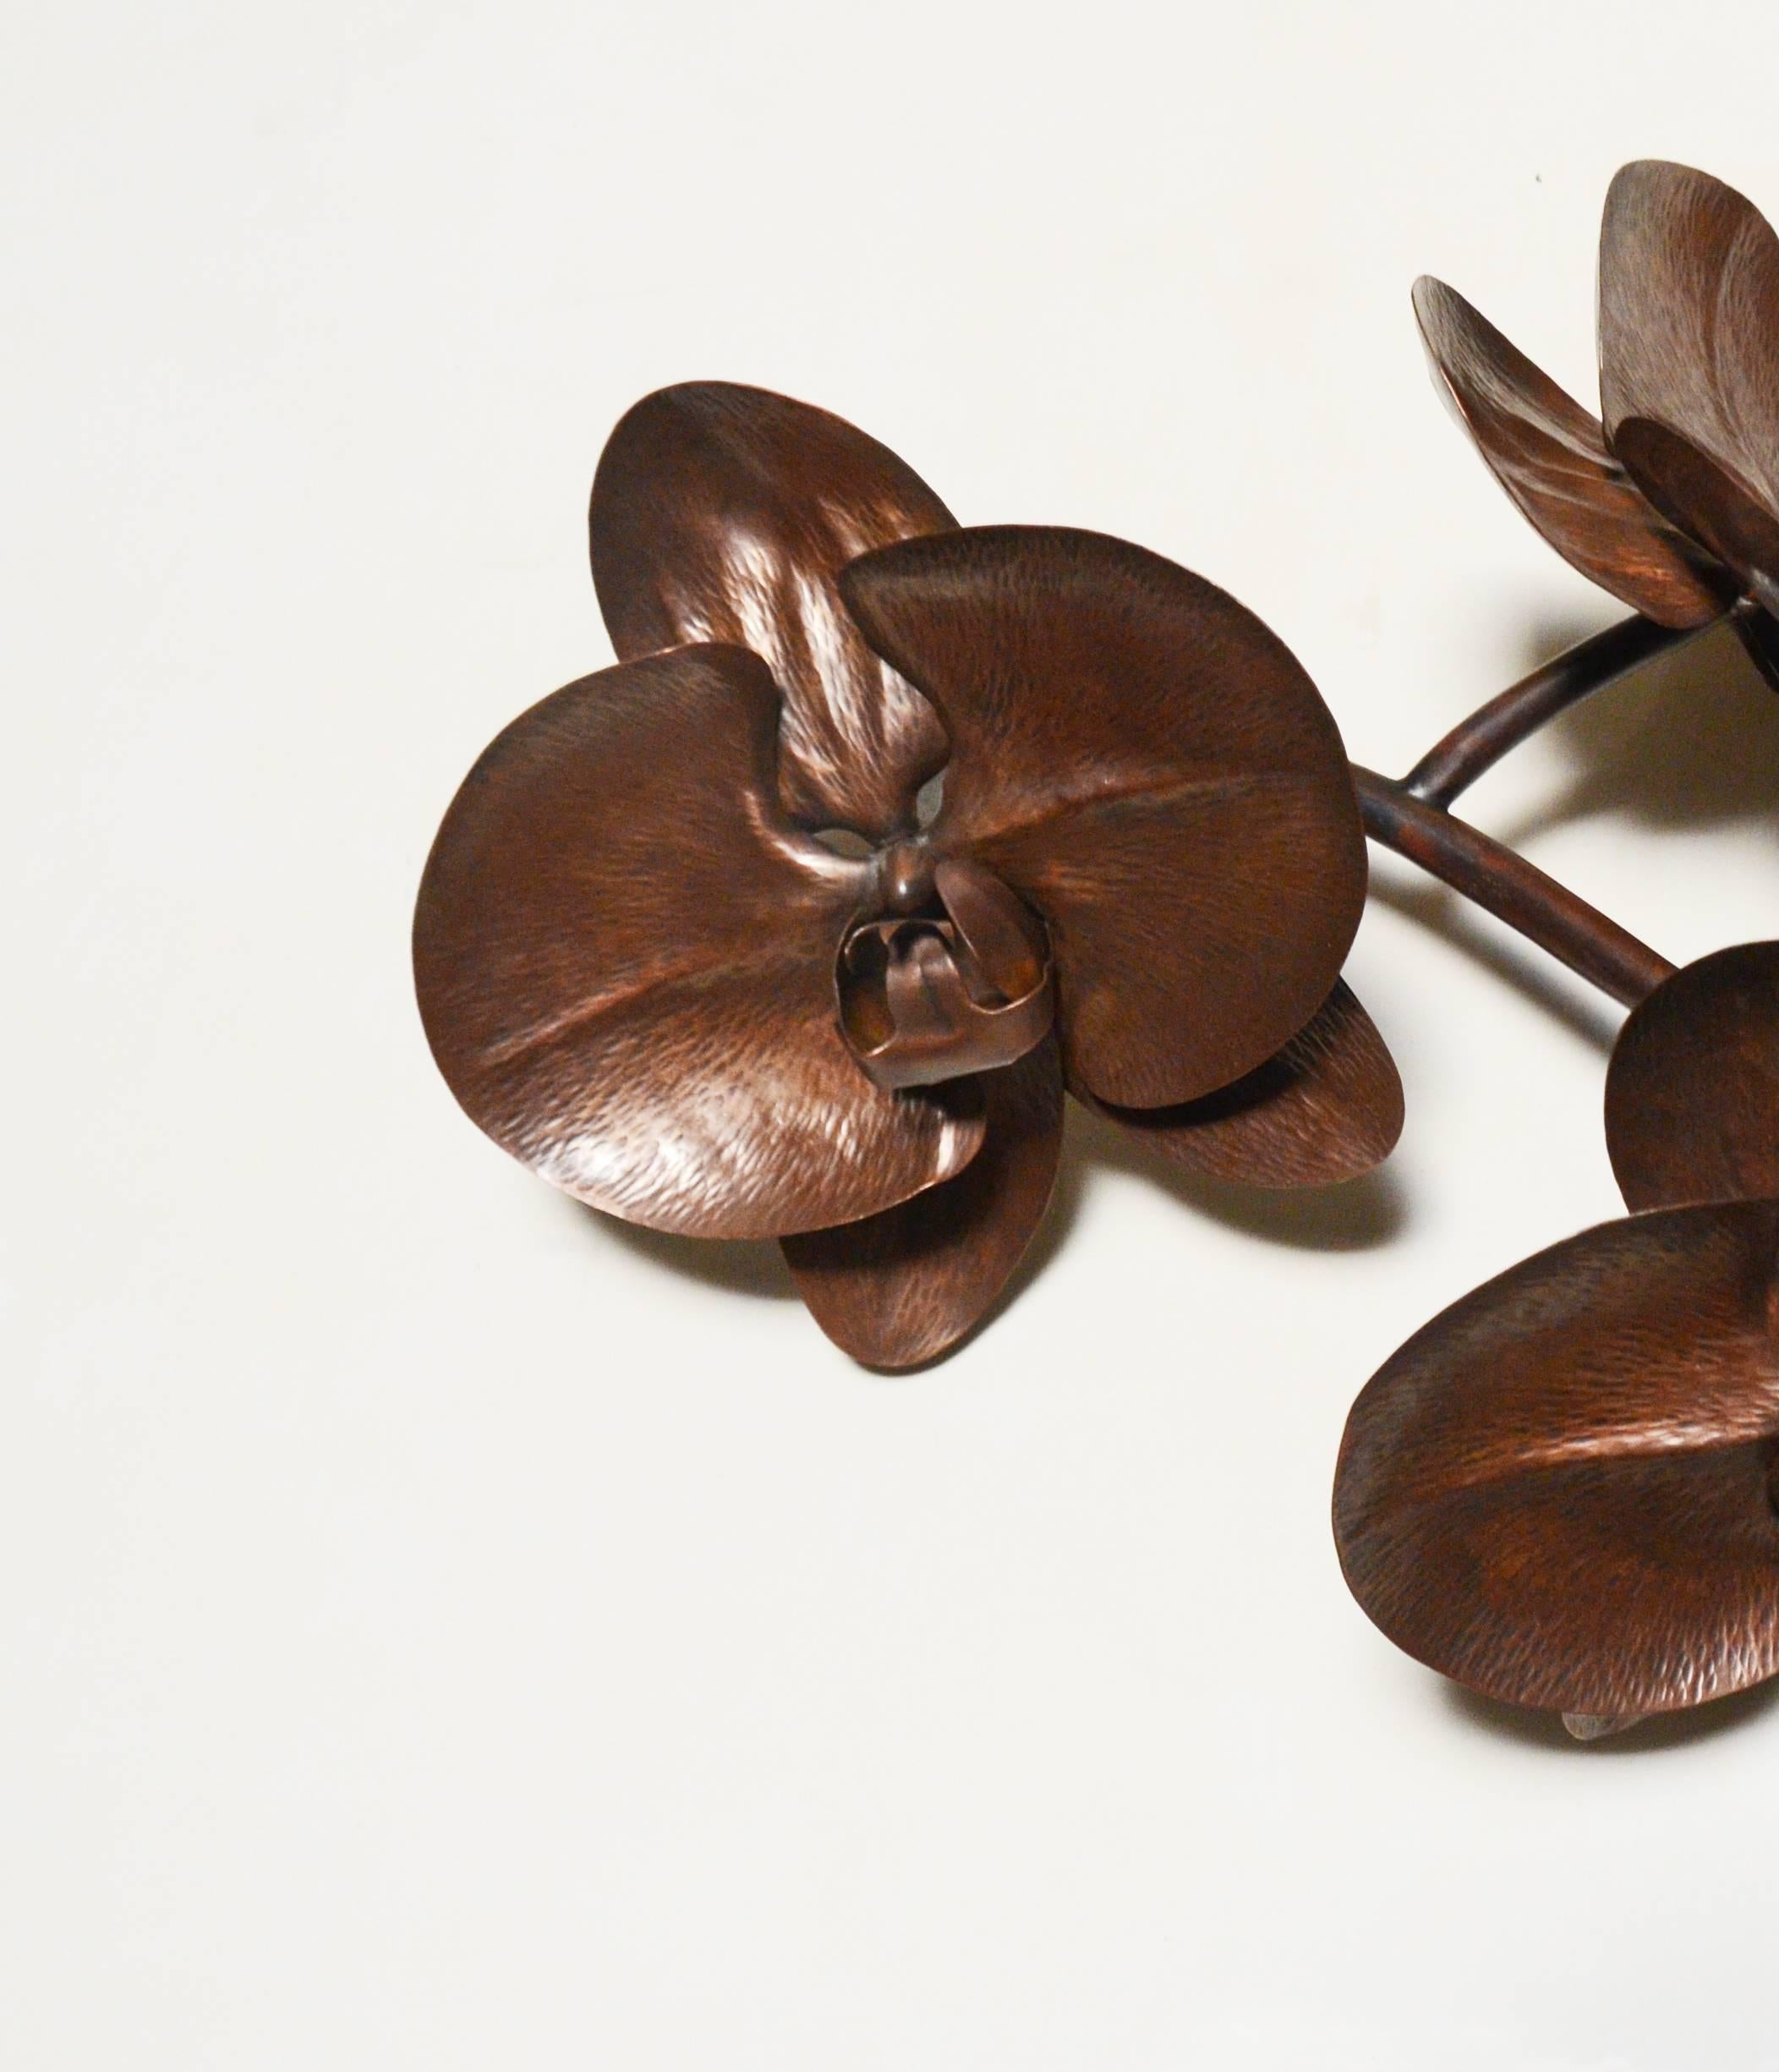 Large Orchid Sculpture by Robert Kuo, Hand Repoussé Copper, Limited Edition 1